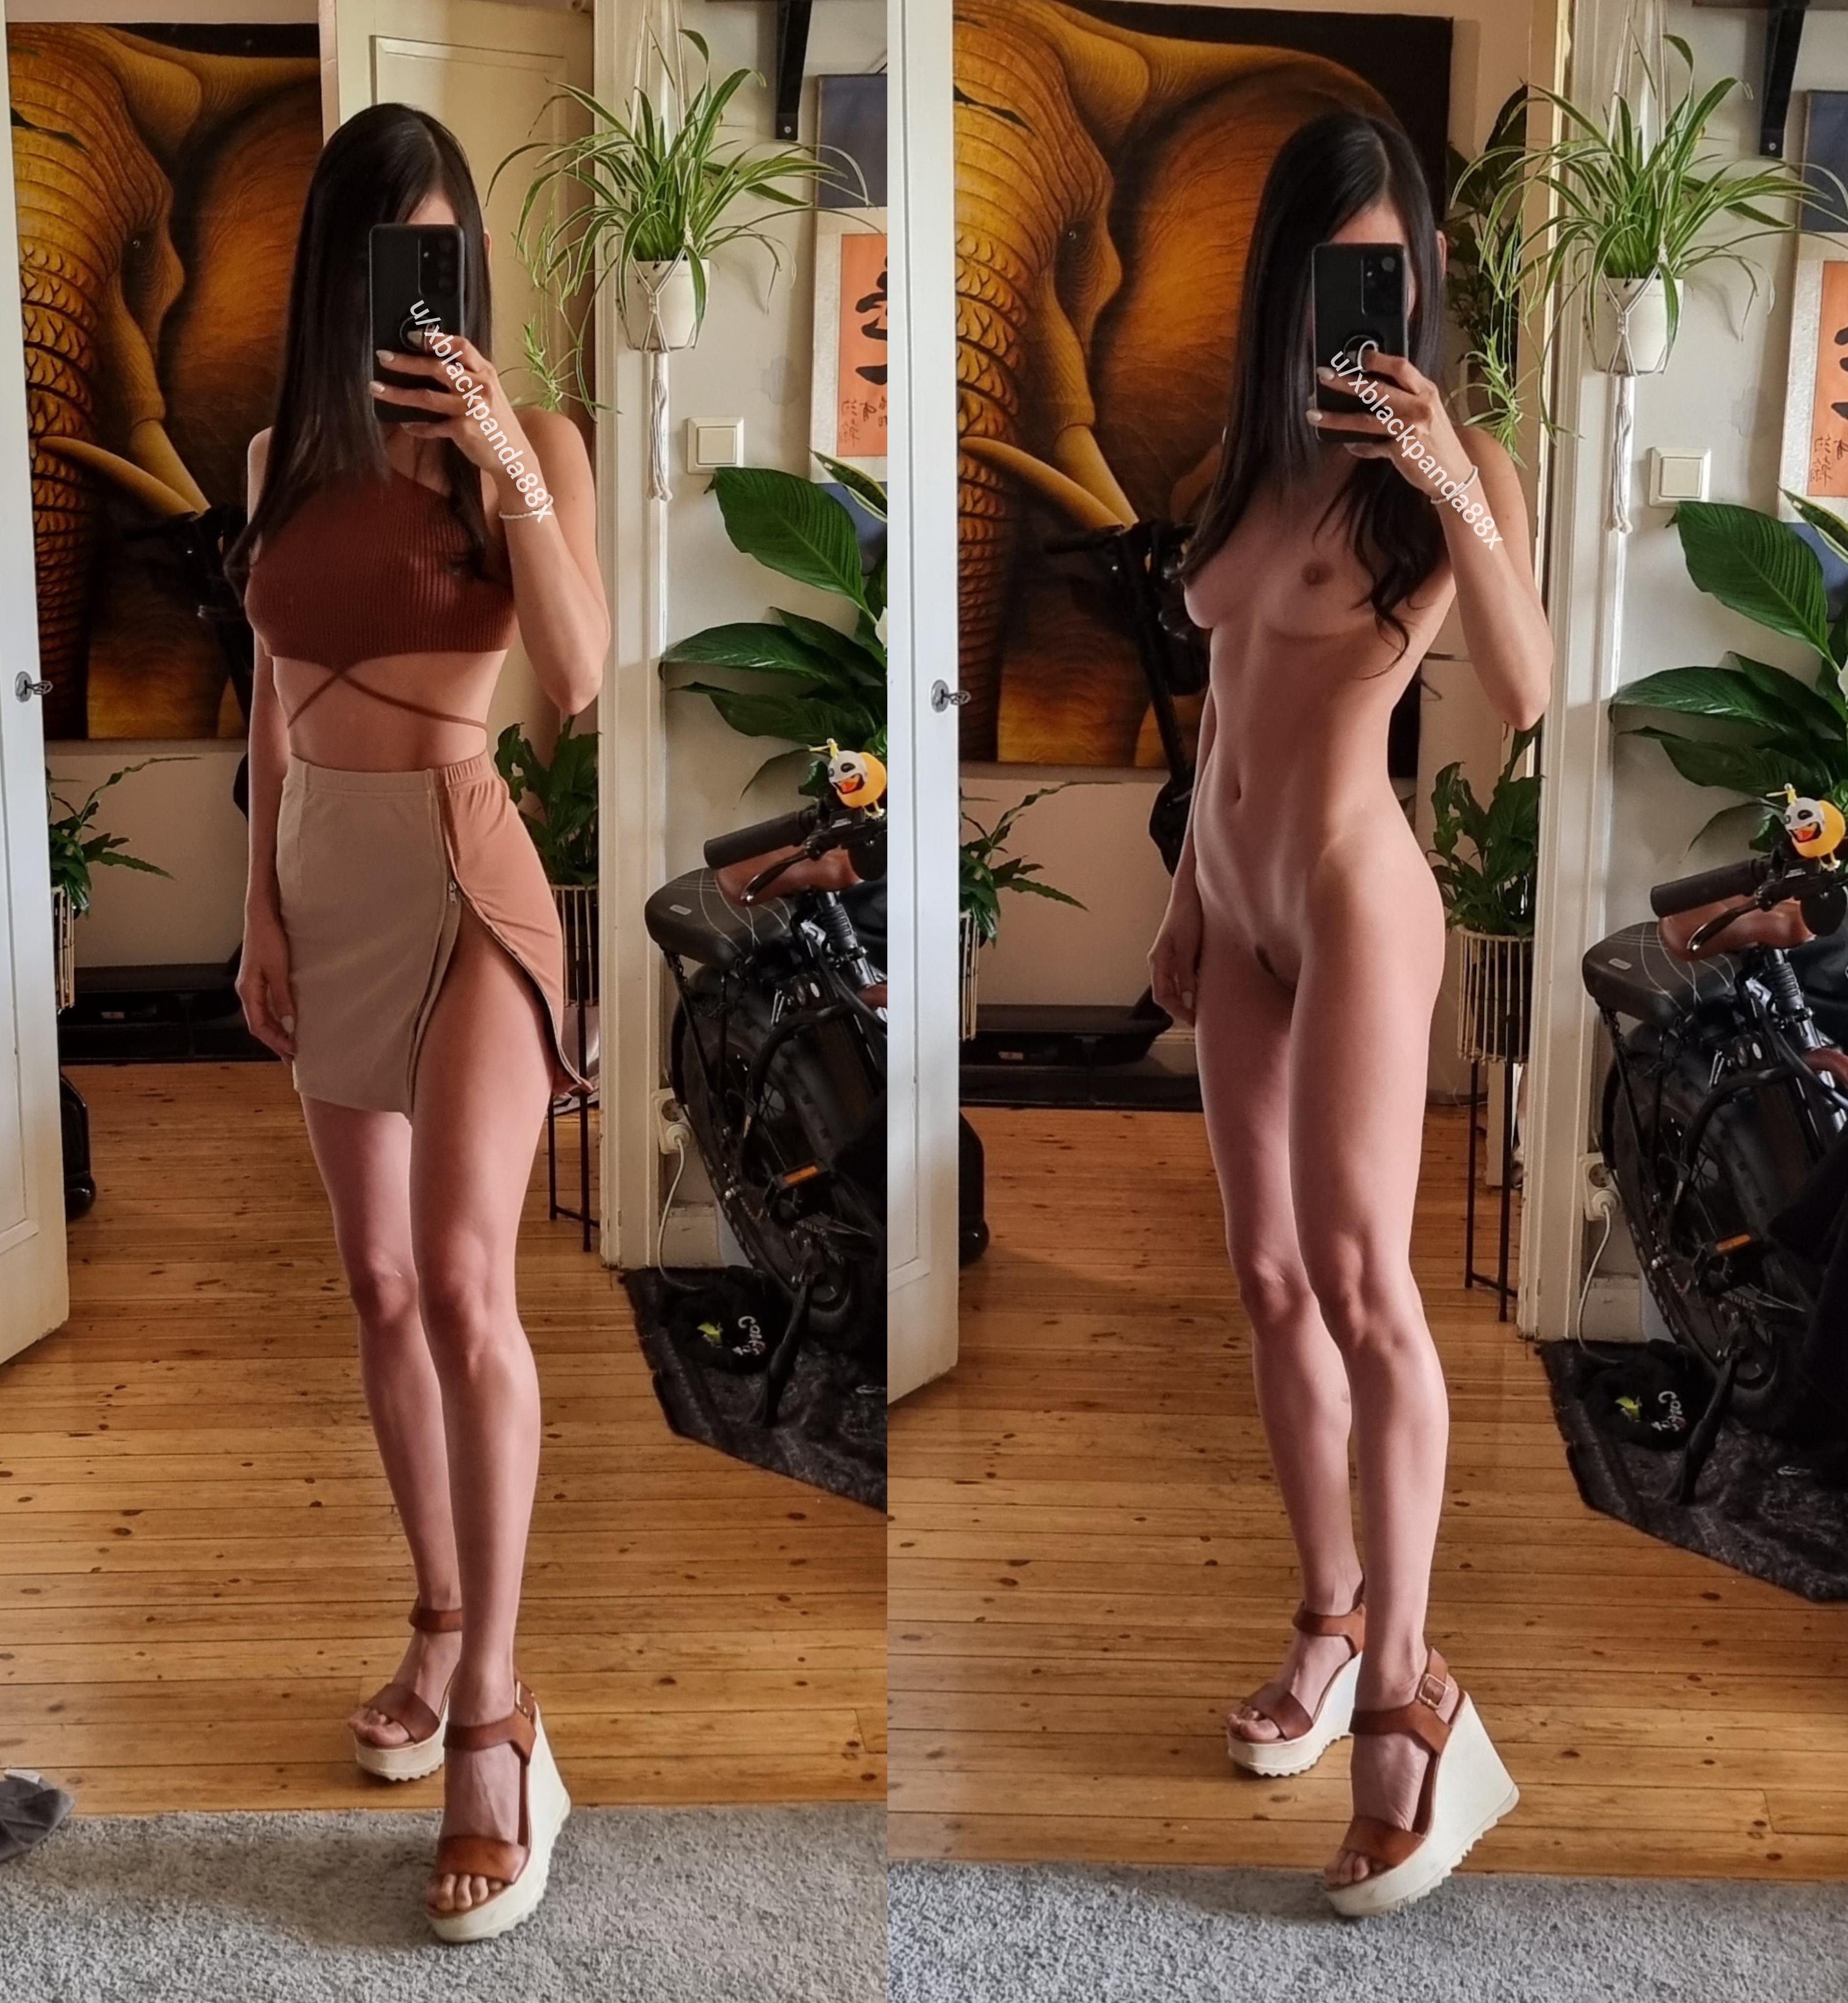 Tight dress obssession✌️34 year old Filipina mOm body picture